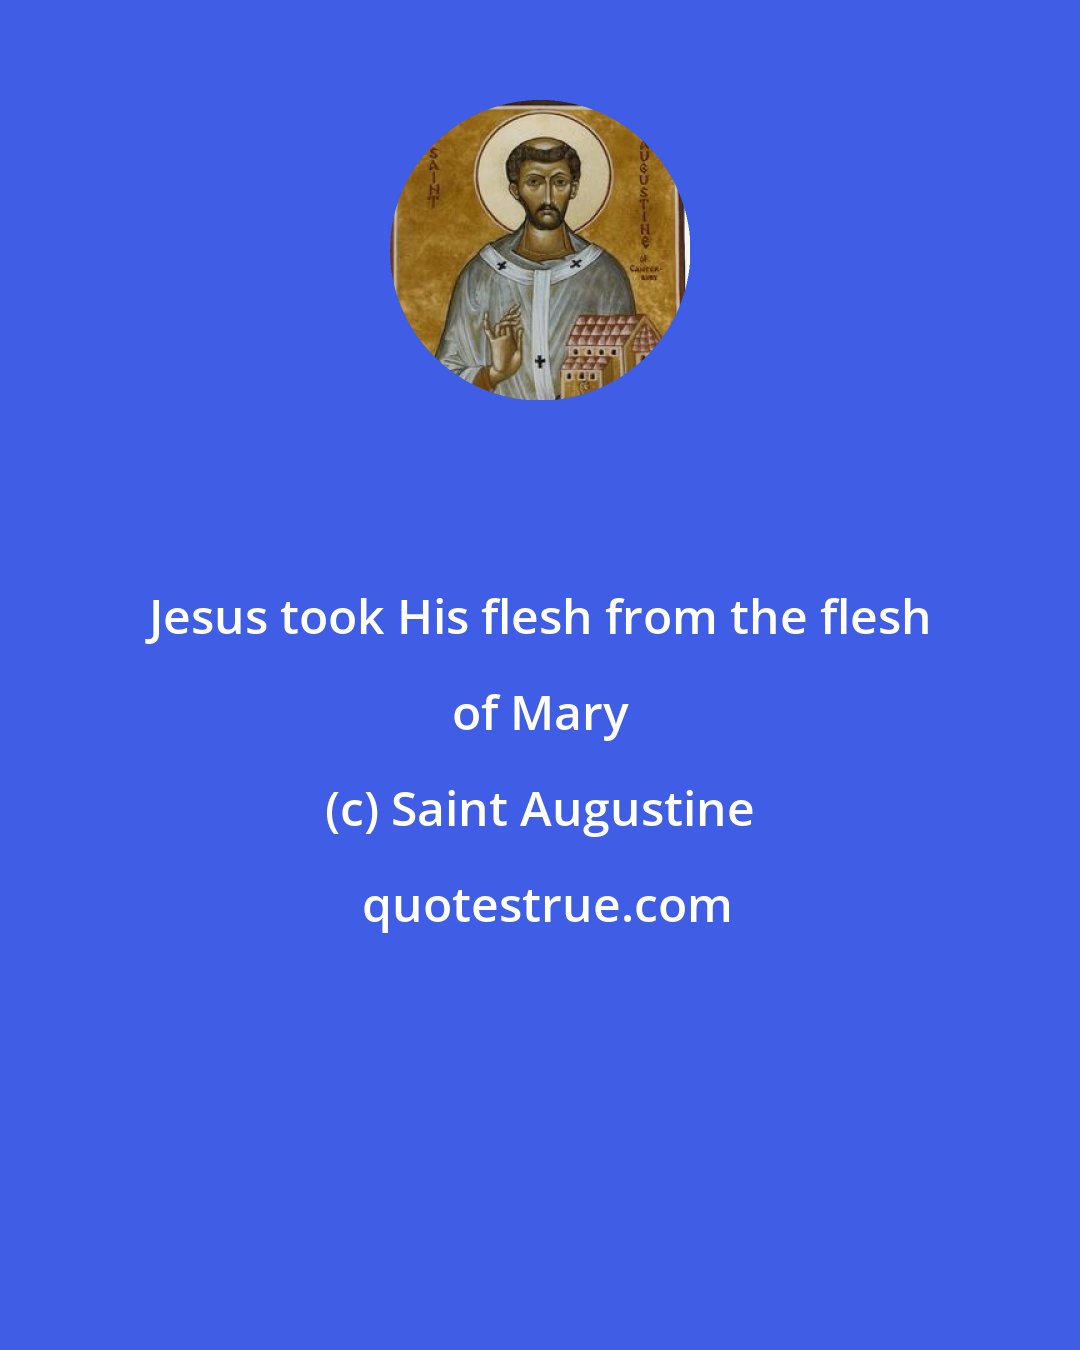 Saint Augustine: Jesus took His flesh from the flesh of Mary